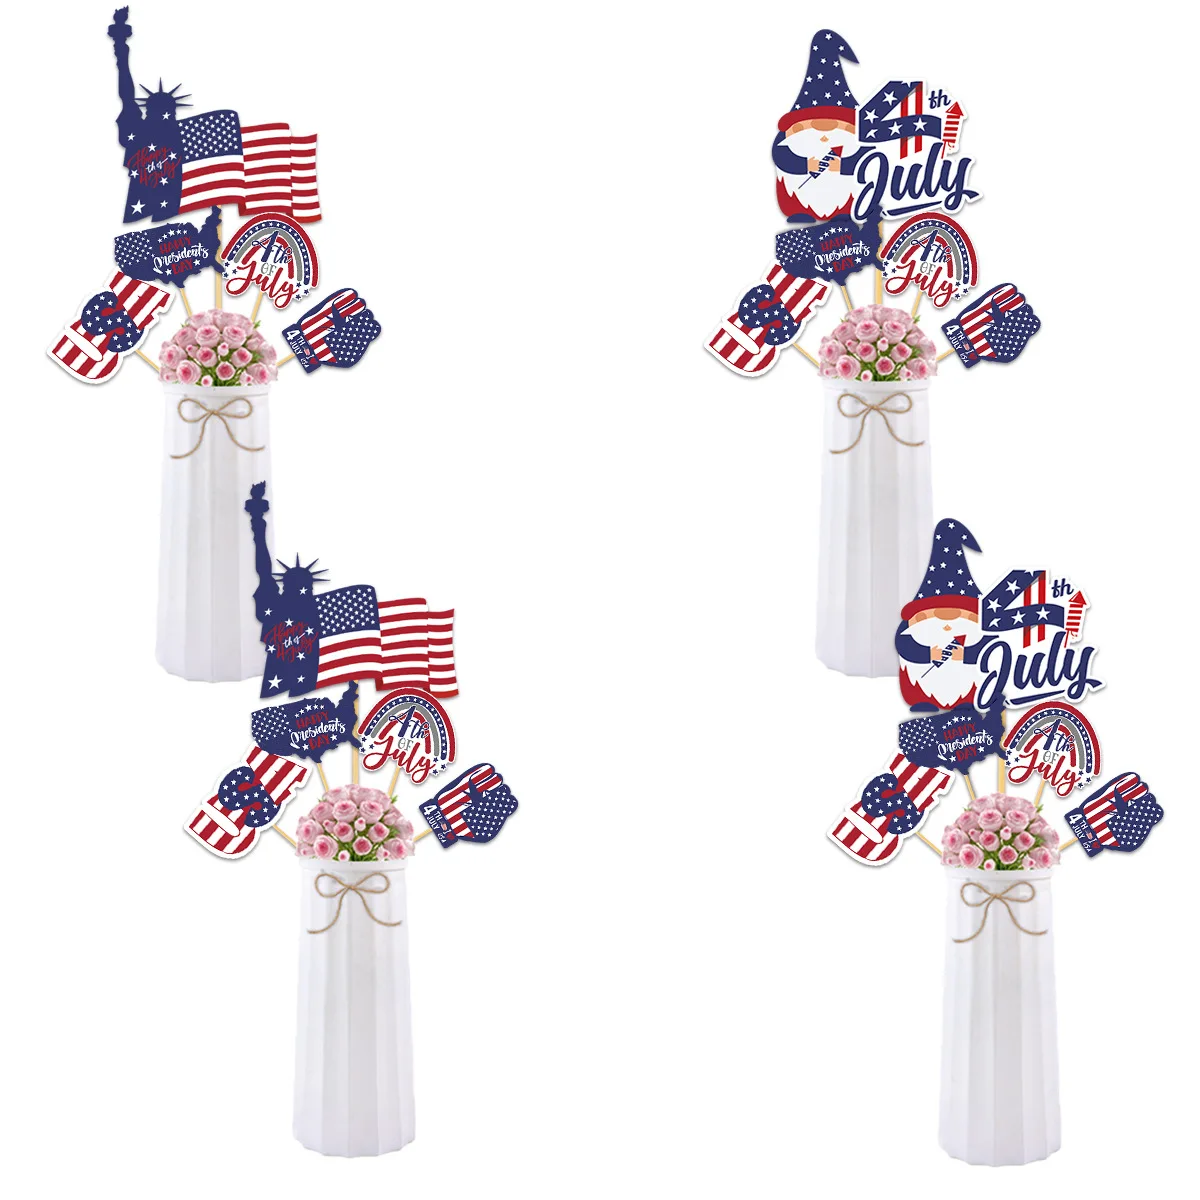 

20pcs American Independence Day Decorative Vase Flag Insertion USA Statue of Liberty Theme Party Decro 4th of July Celebrate